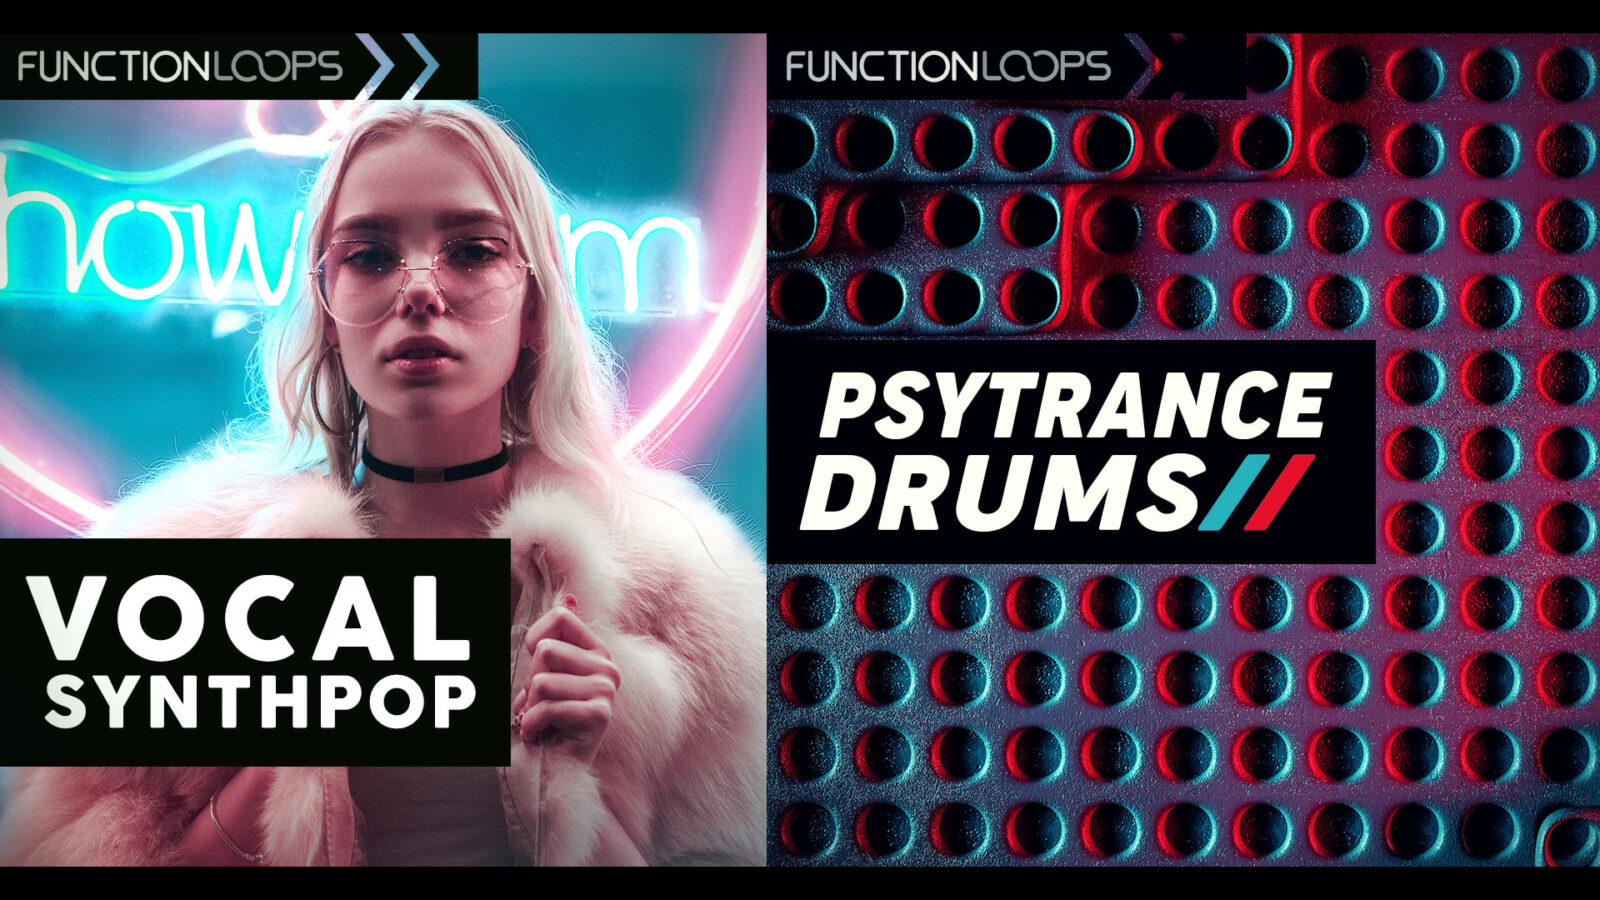 Vocal Synthpop and Psytrance Drums Sample Packs Are Now FREE!